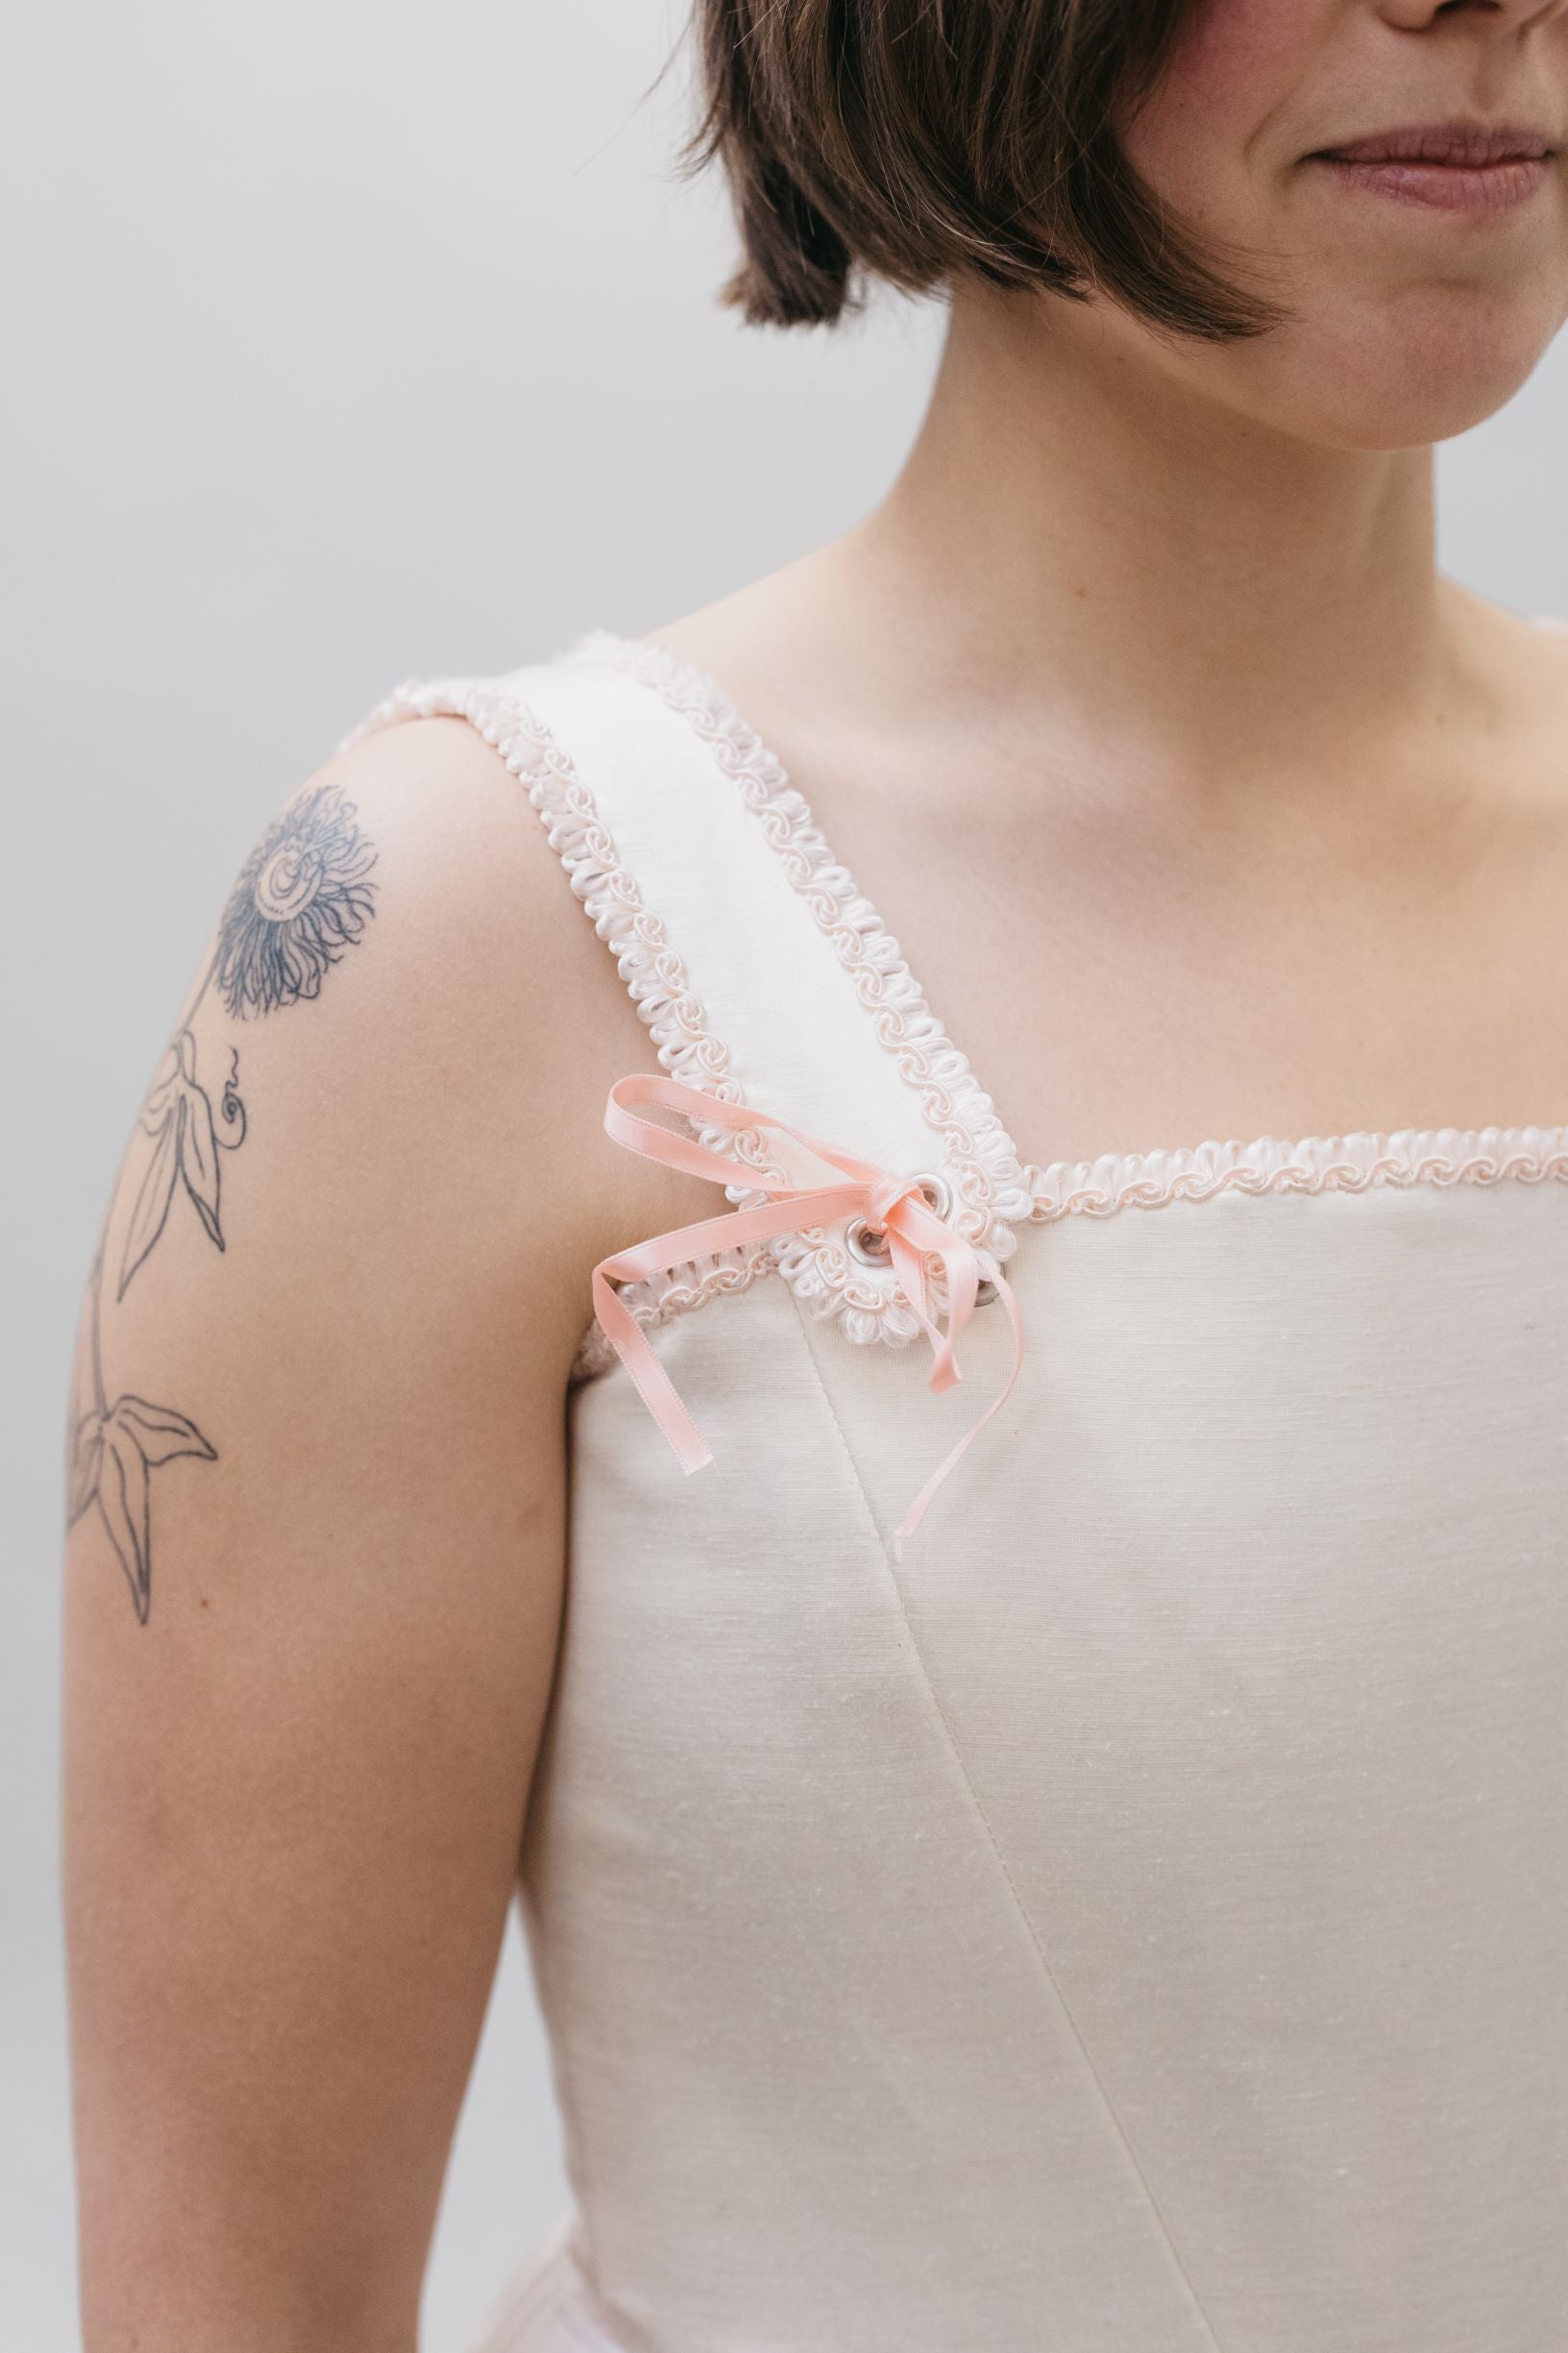 Close up of the square neck Lady's Corset strap withe a pink bow ribbon at the base of the strap on white woman with dark hair and tattoo.  Ribbon tie detail for Corset top.